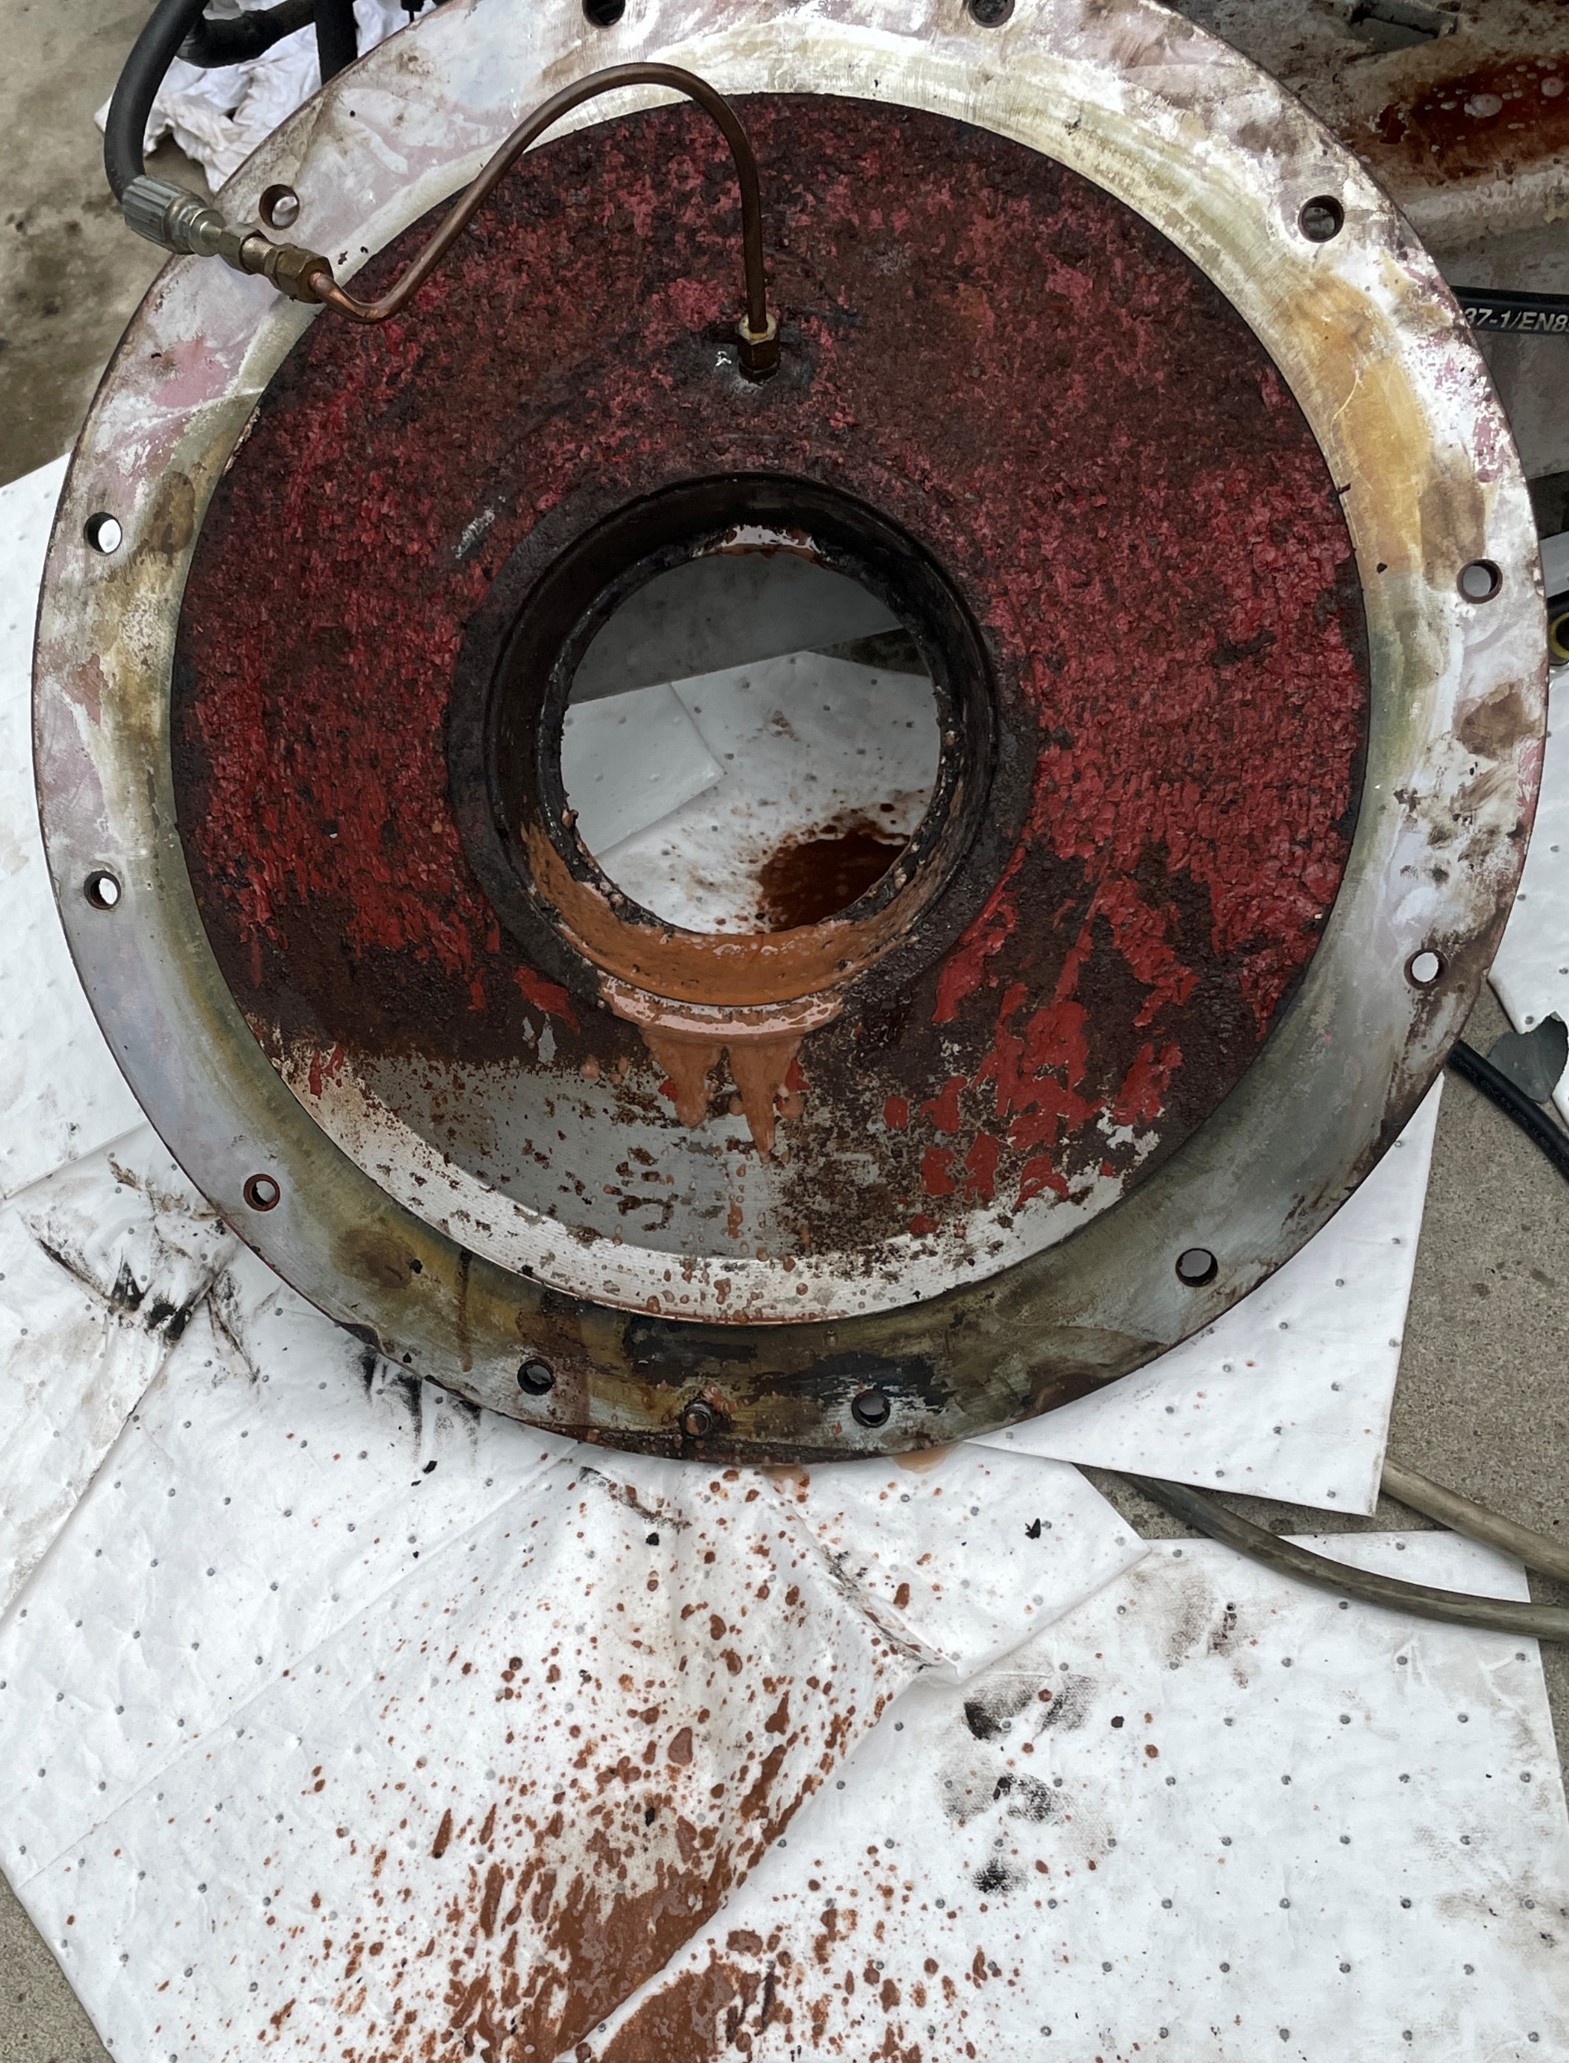 the flange that houses the roller bearing that supports the main output is removed. Pressure was connected to the lubrication system to clear the blockage in the obstructed port. Contaminated fluid is observed discharging from the lubrication system once the obstructed port is cleared